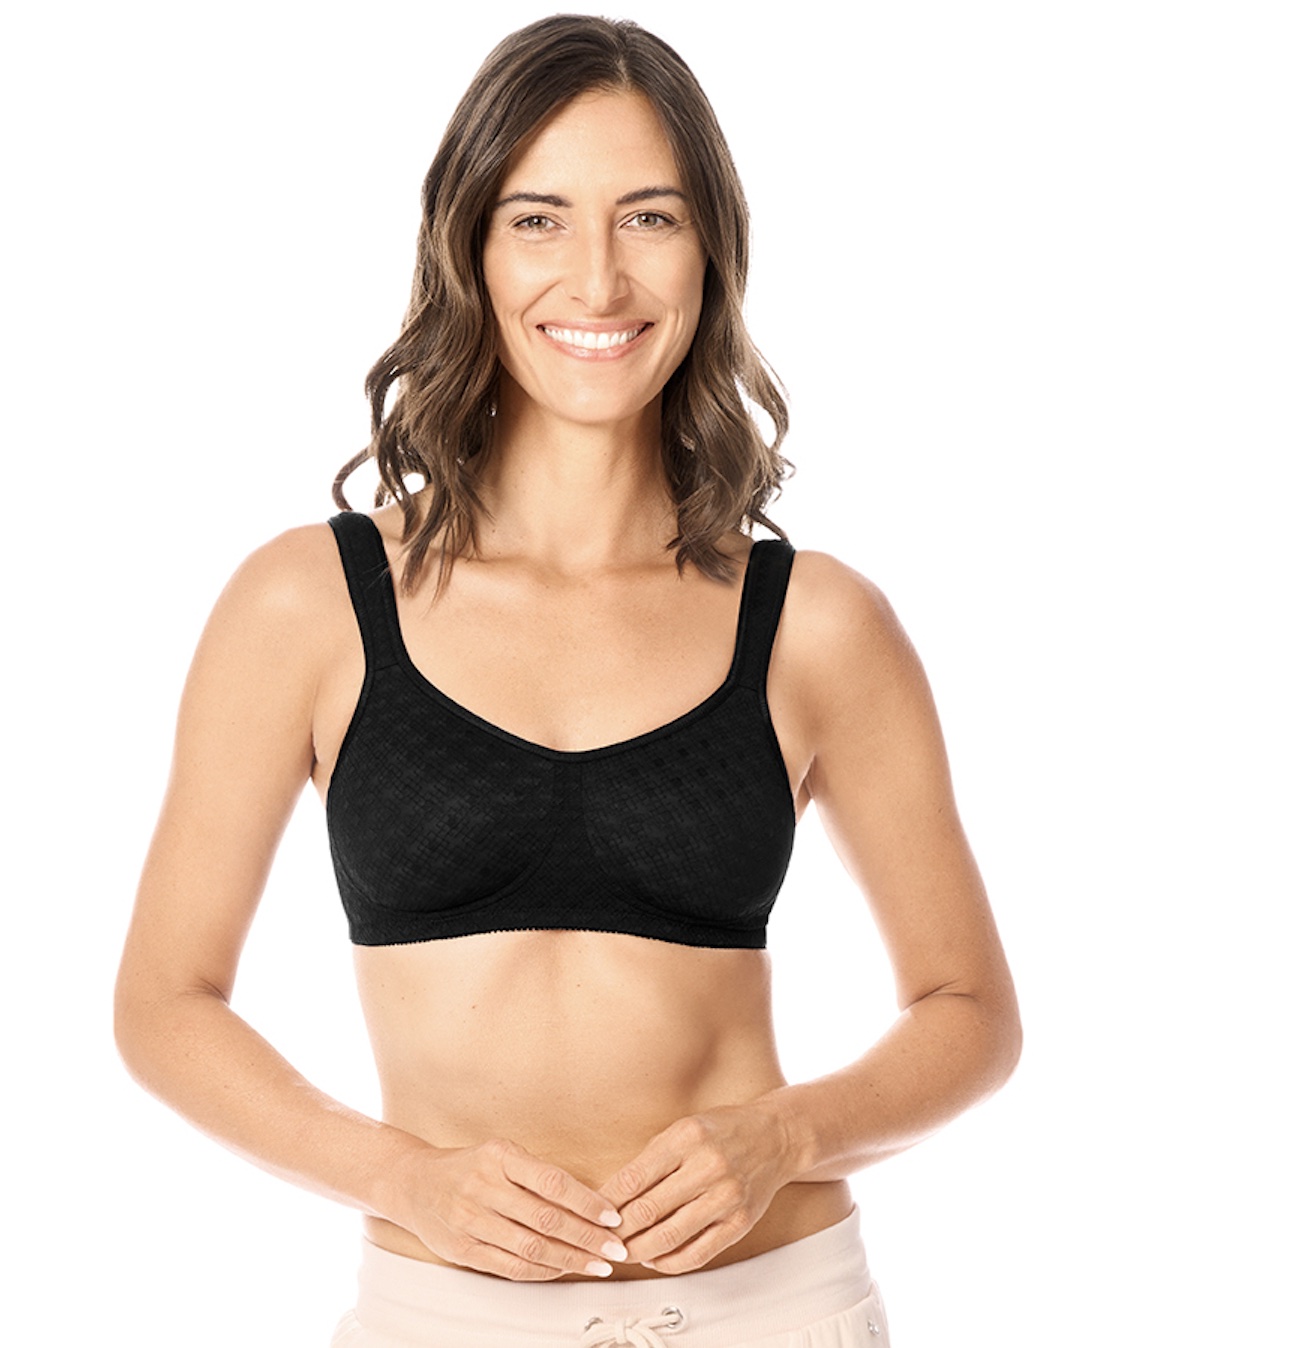 How to Choose the Best Mastectomy Sports Bras for Work Out